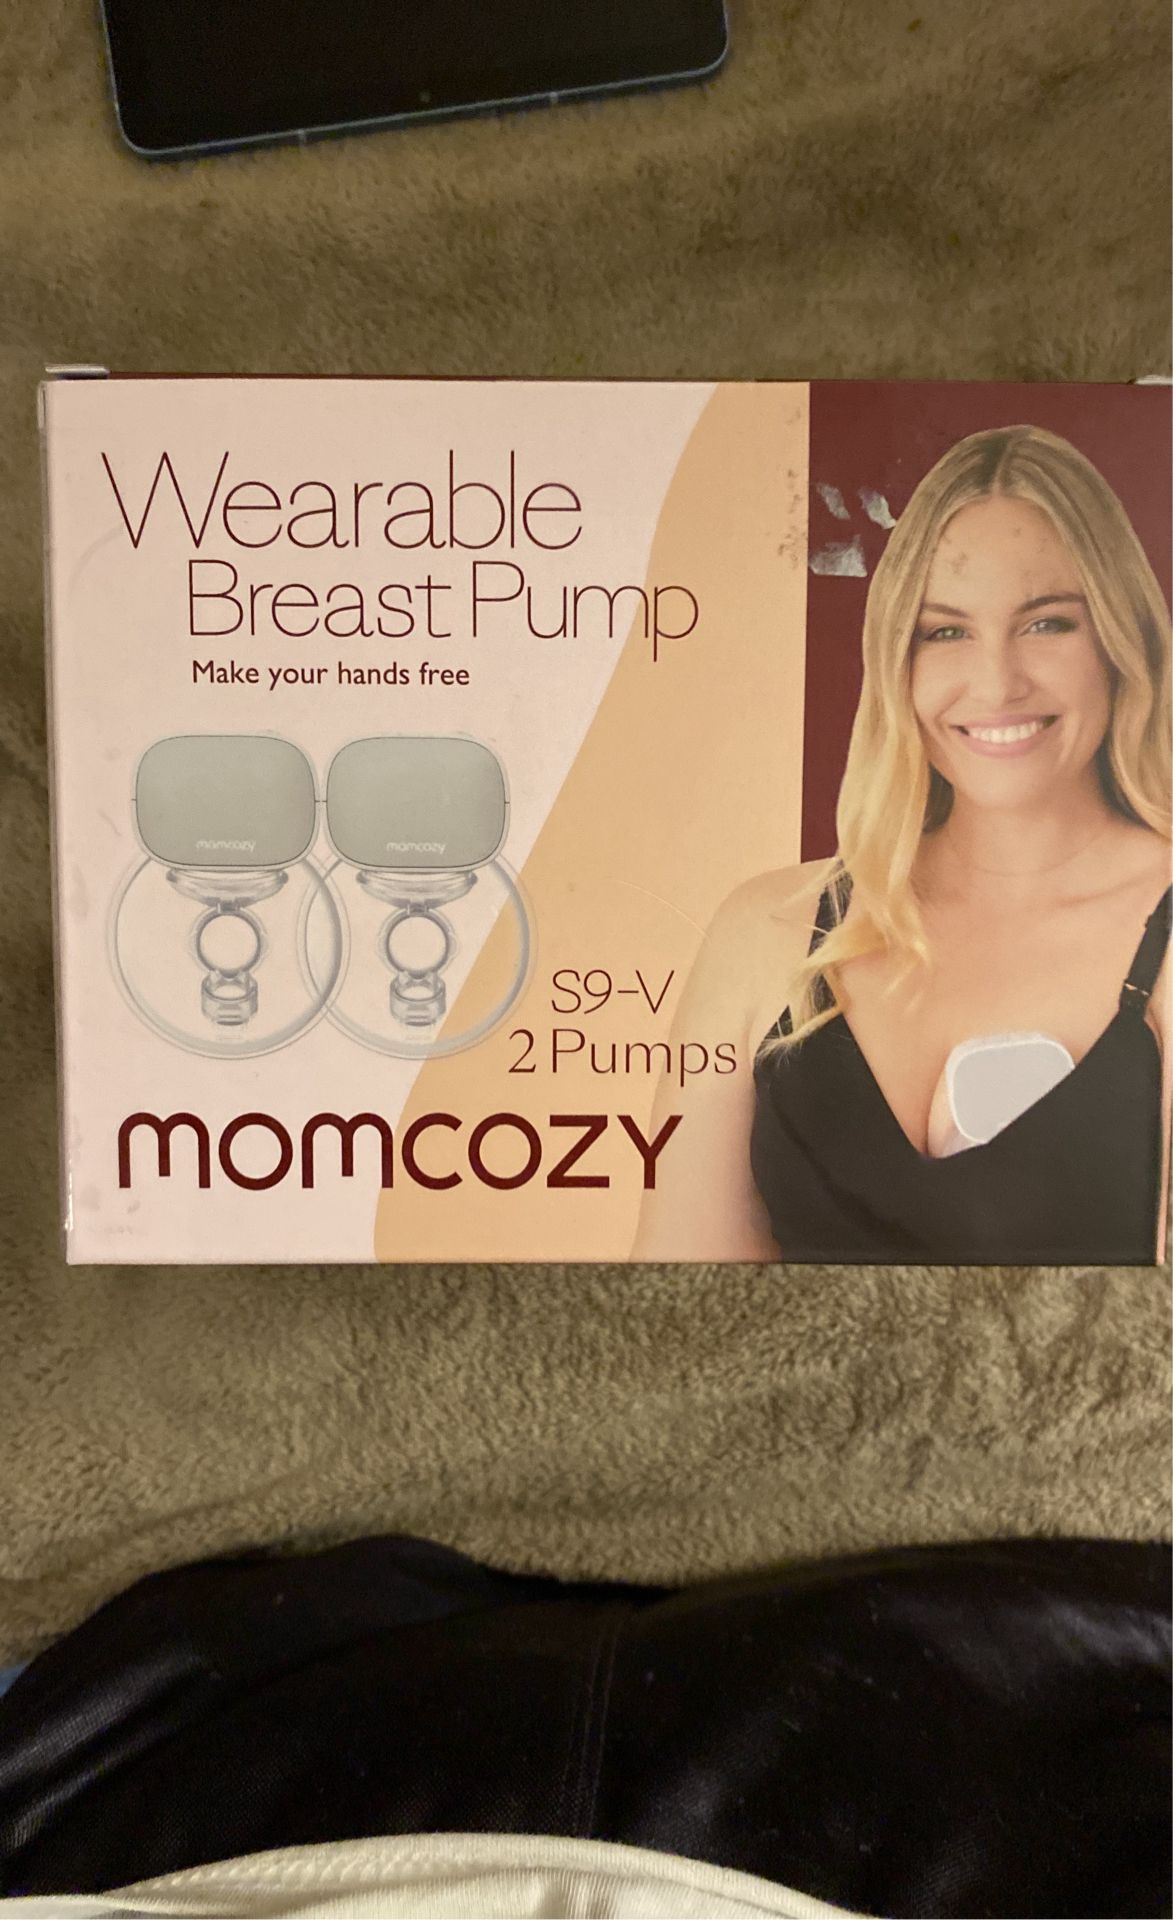 Wearable Breast Pump May Make Your Hands-Free It’s 292 Pumps Cozy